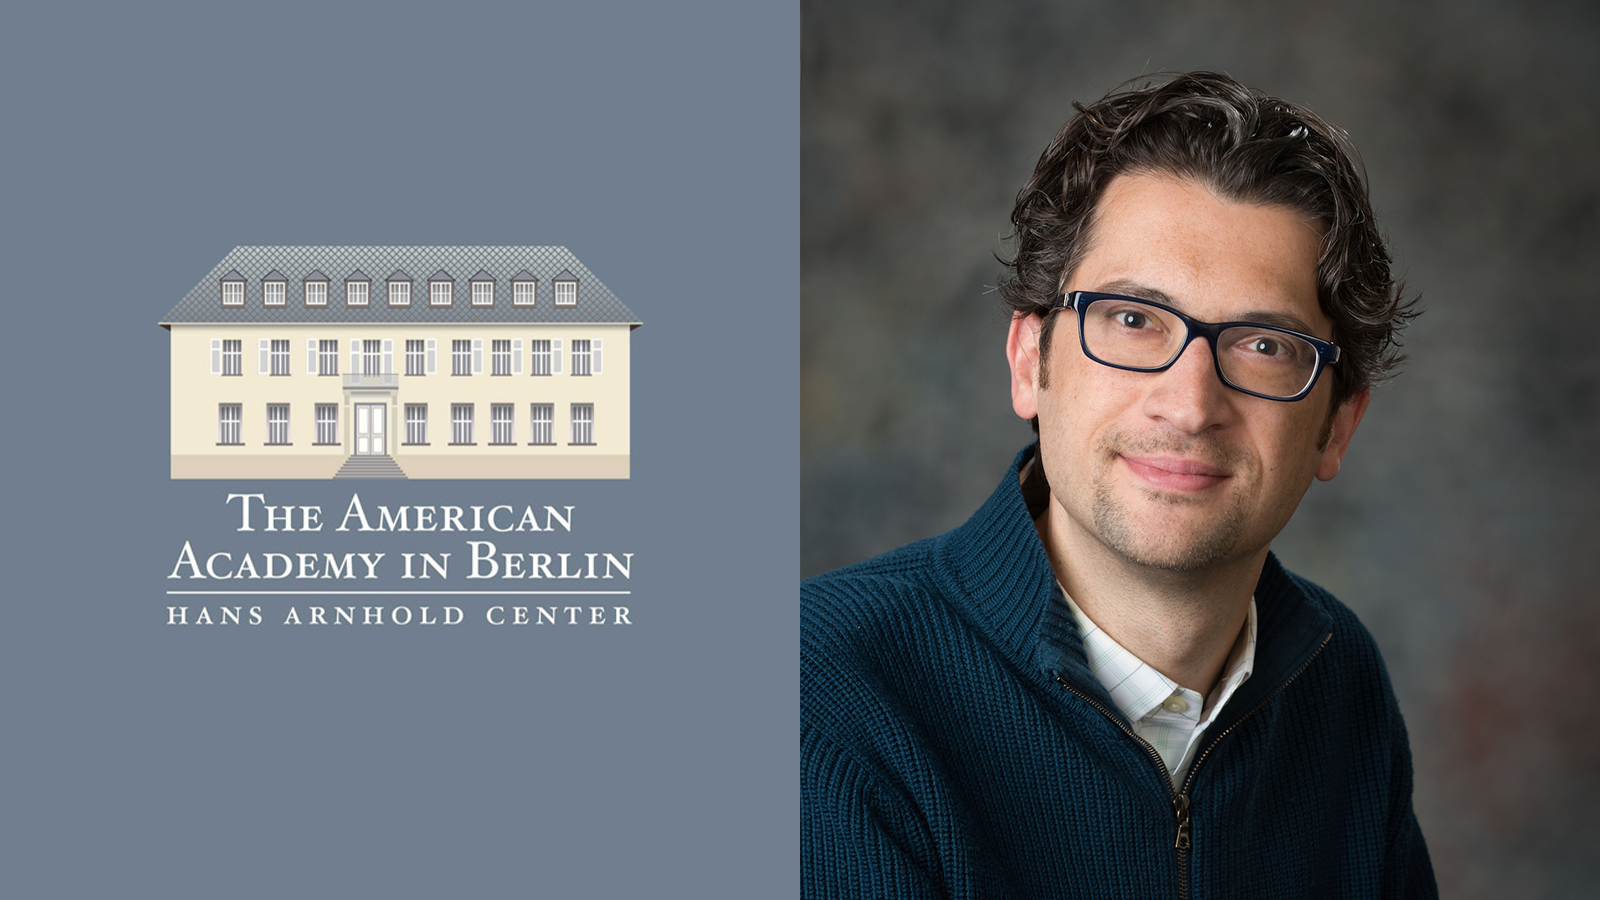 Marco Abel and the logo of The American Academy in Berlin - Hans Arnhold Center; links to news story